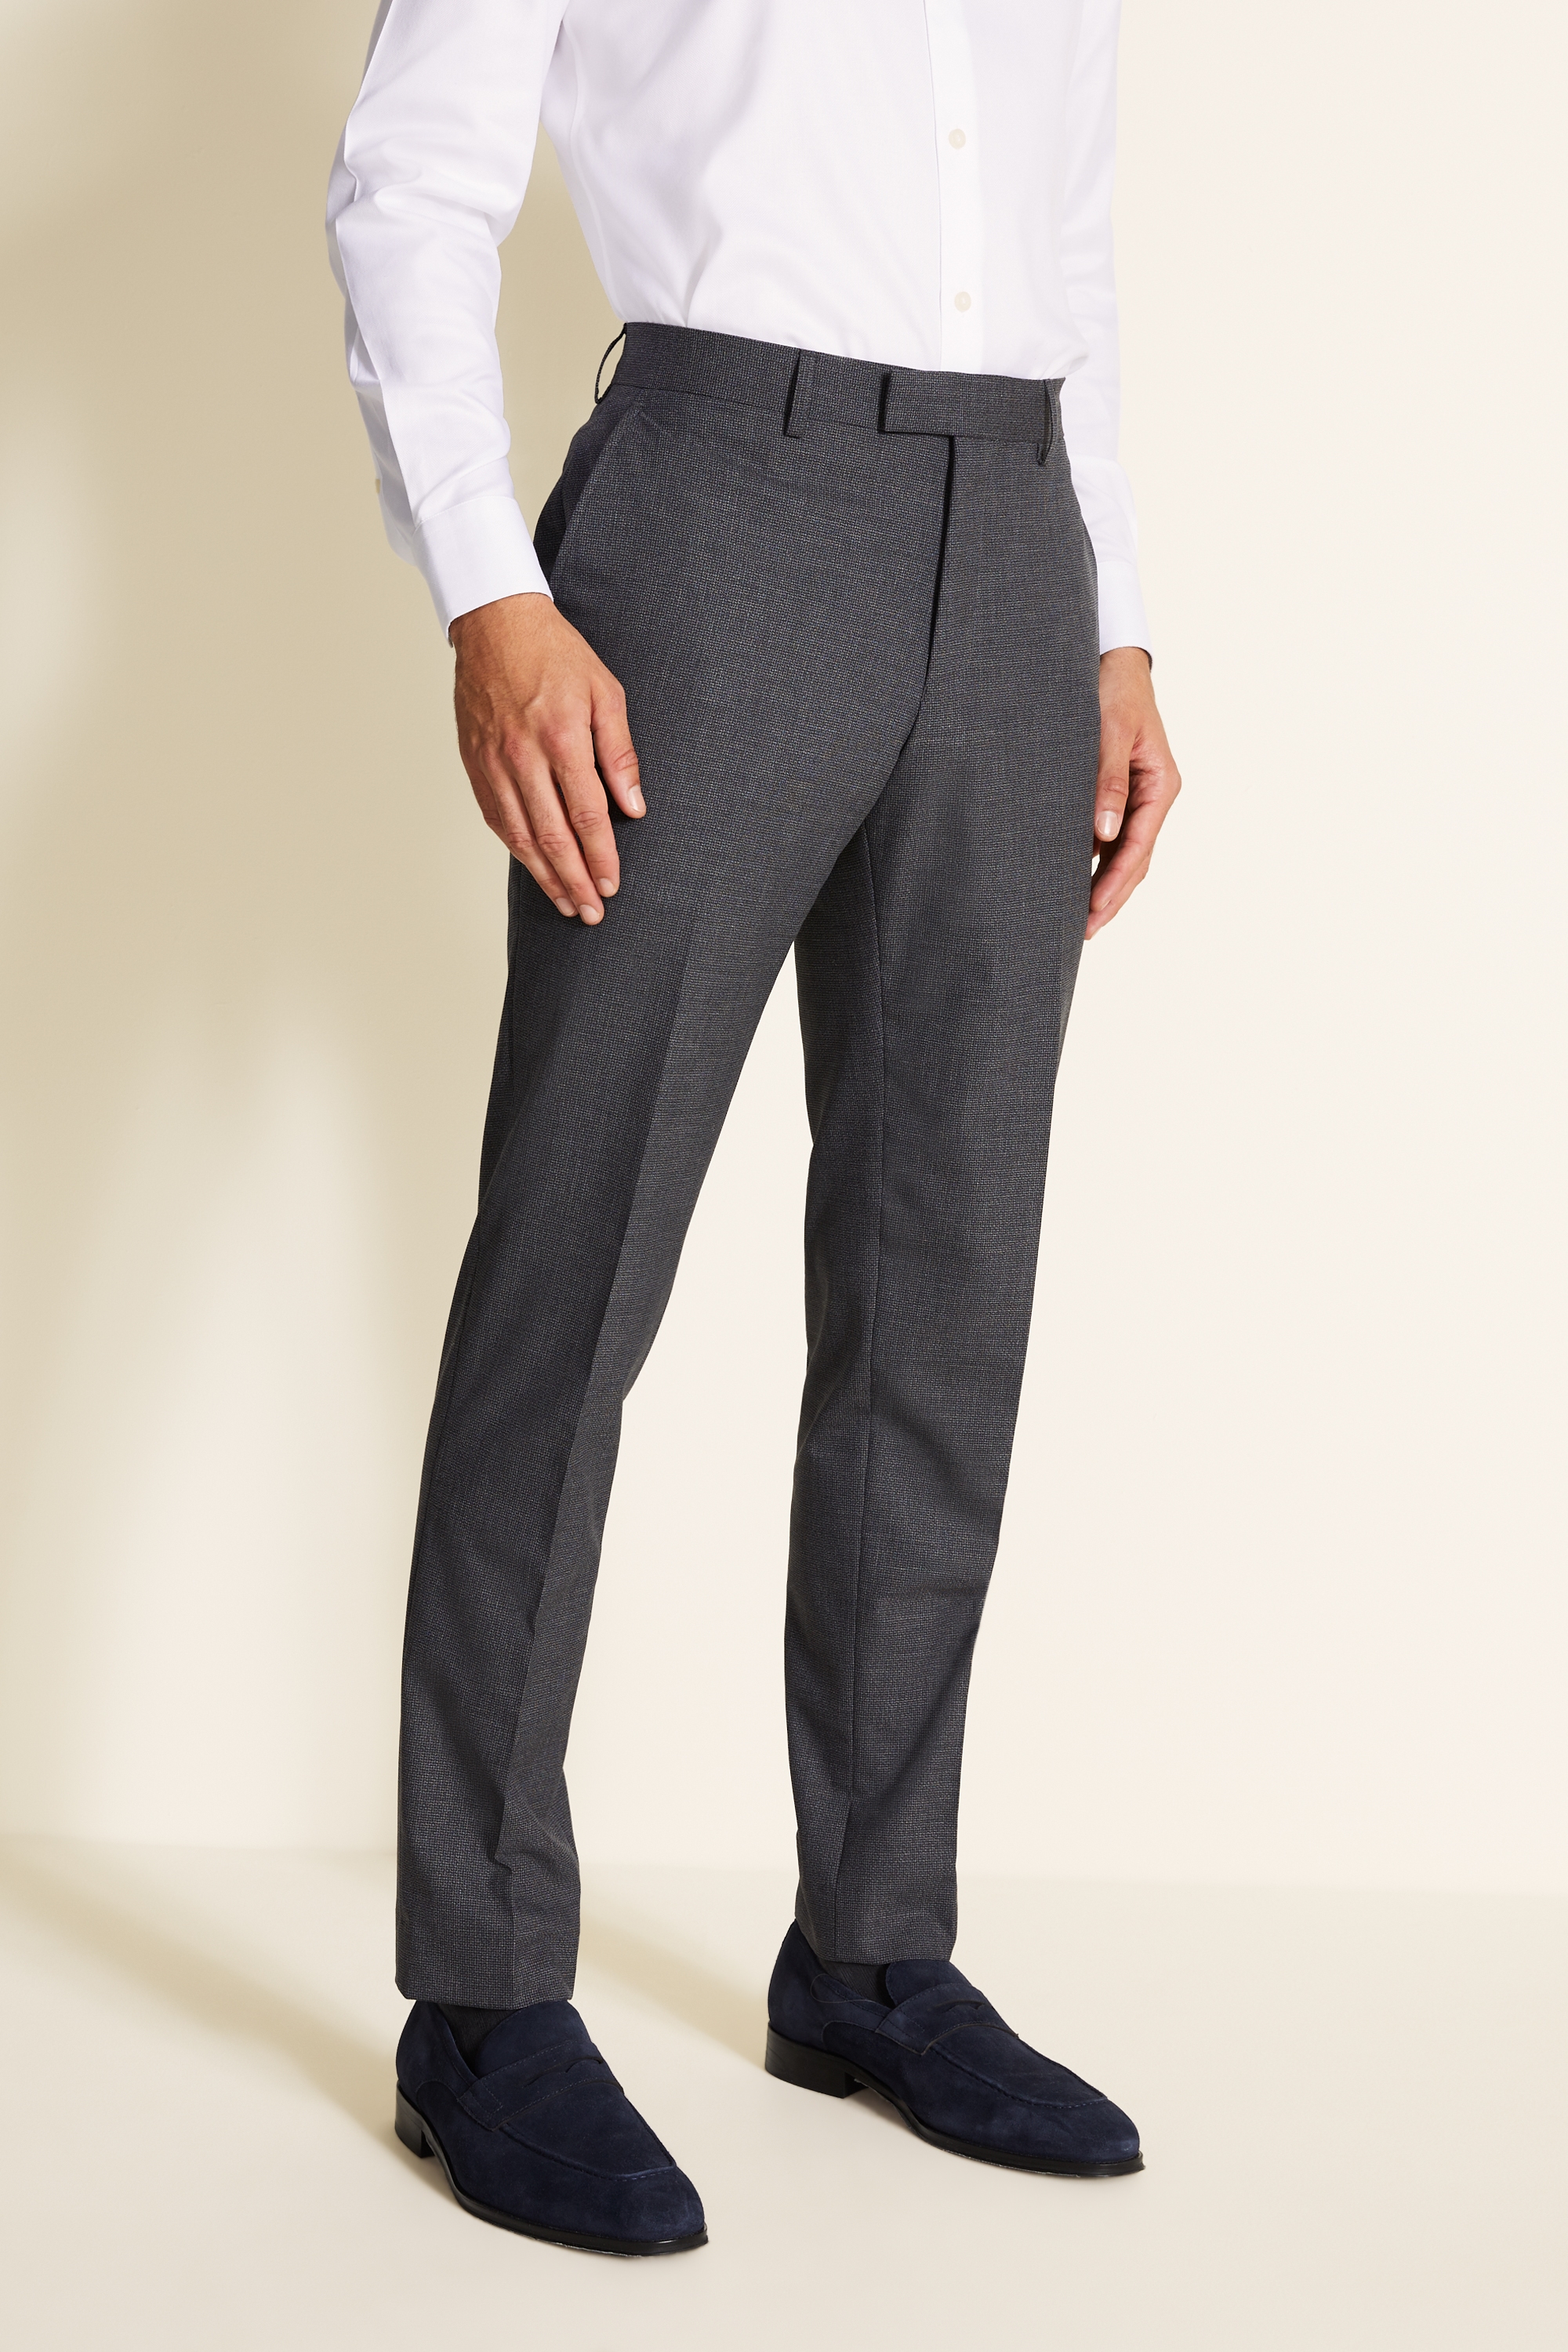 Tailored Fit Charcoal Puppytooth Pant